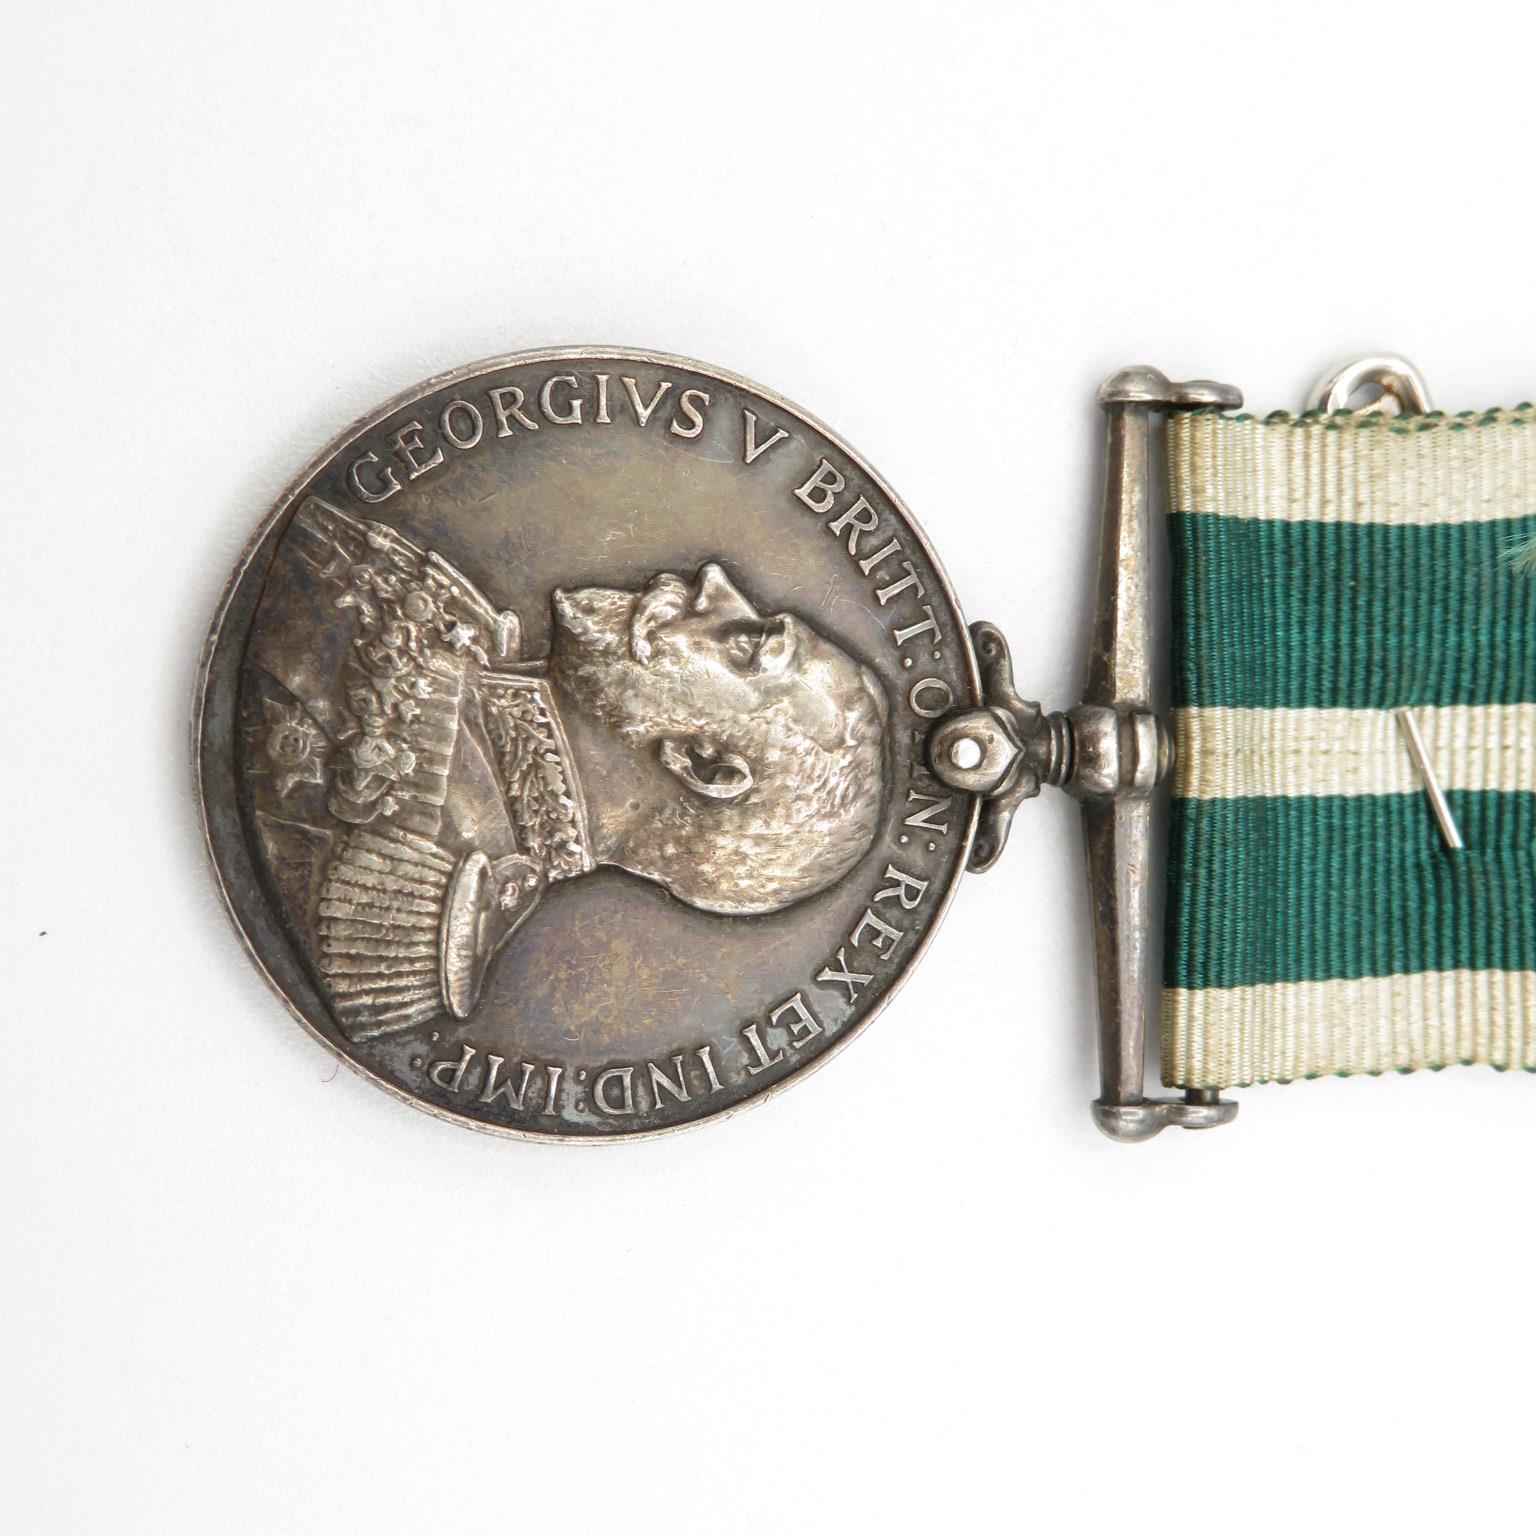 WWI Navy Long Service medal group named 198468 WT Crust A.B.R.N. HMS Lancaster on long service - - Image 8 of 9